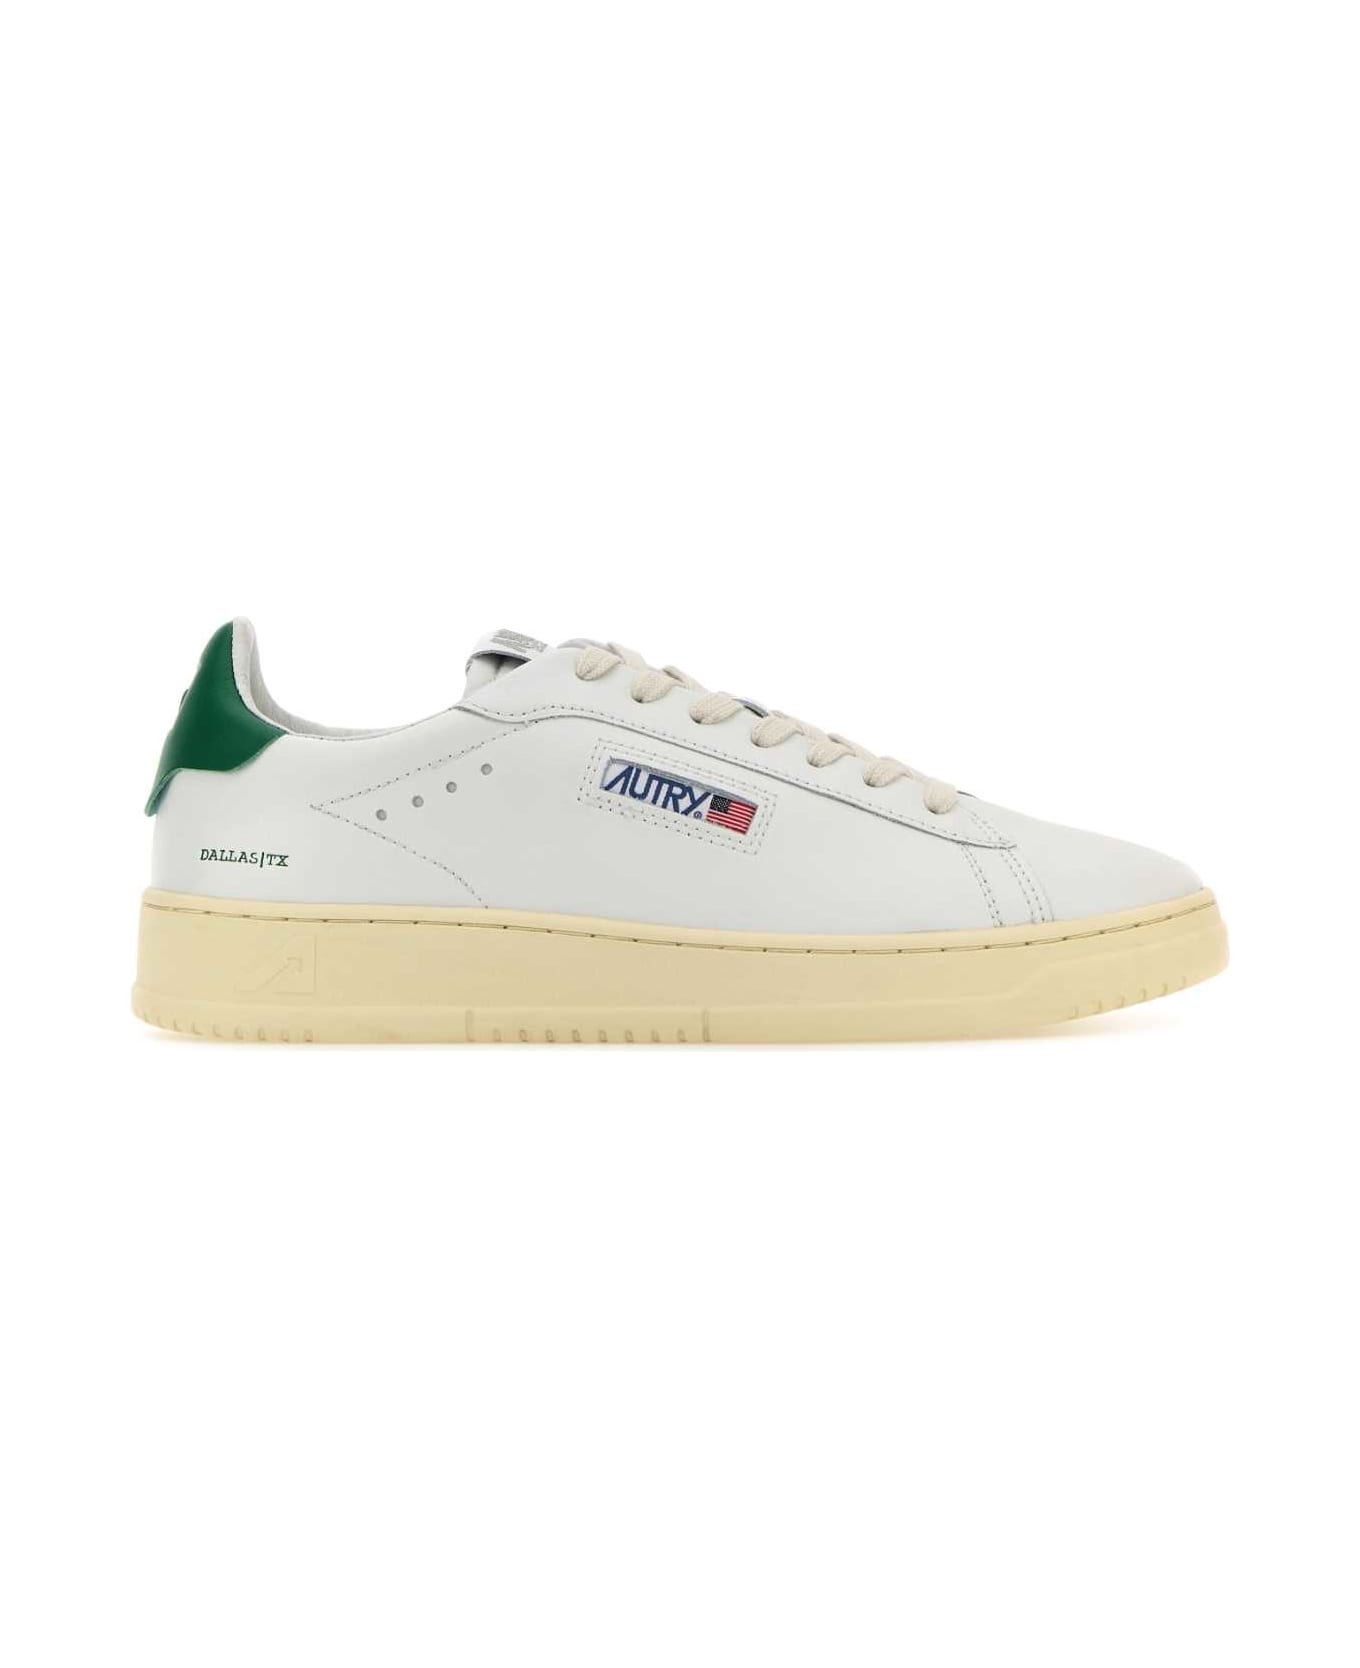 Autry White Leather Dallas Sneakers - NW02